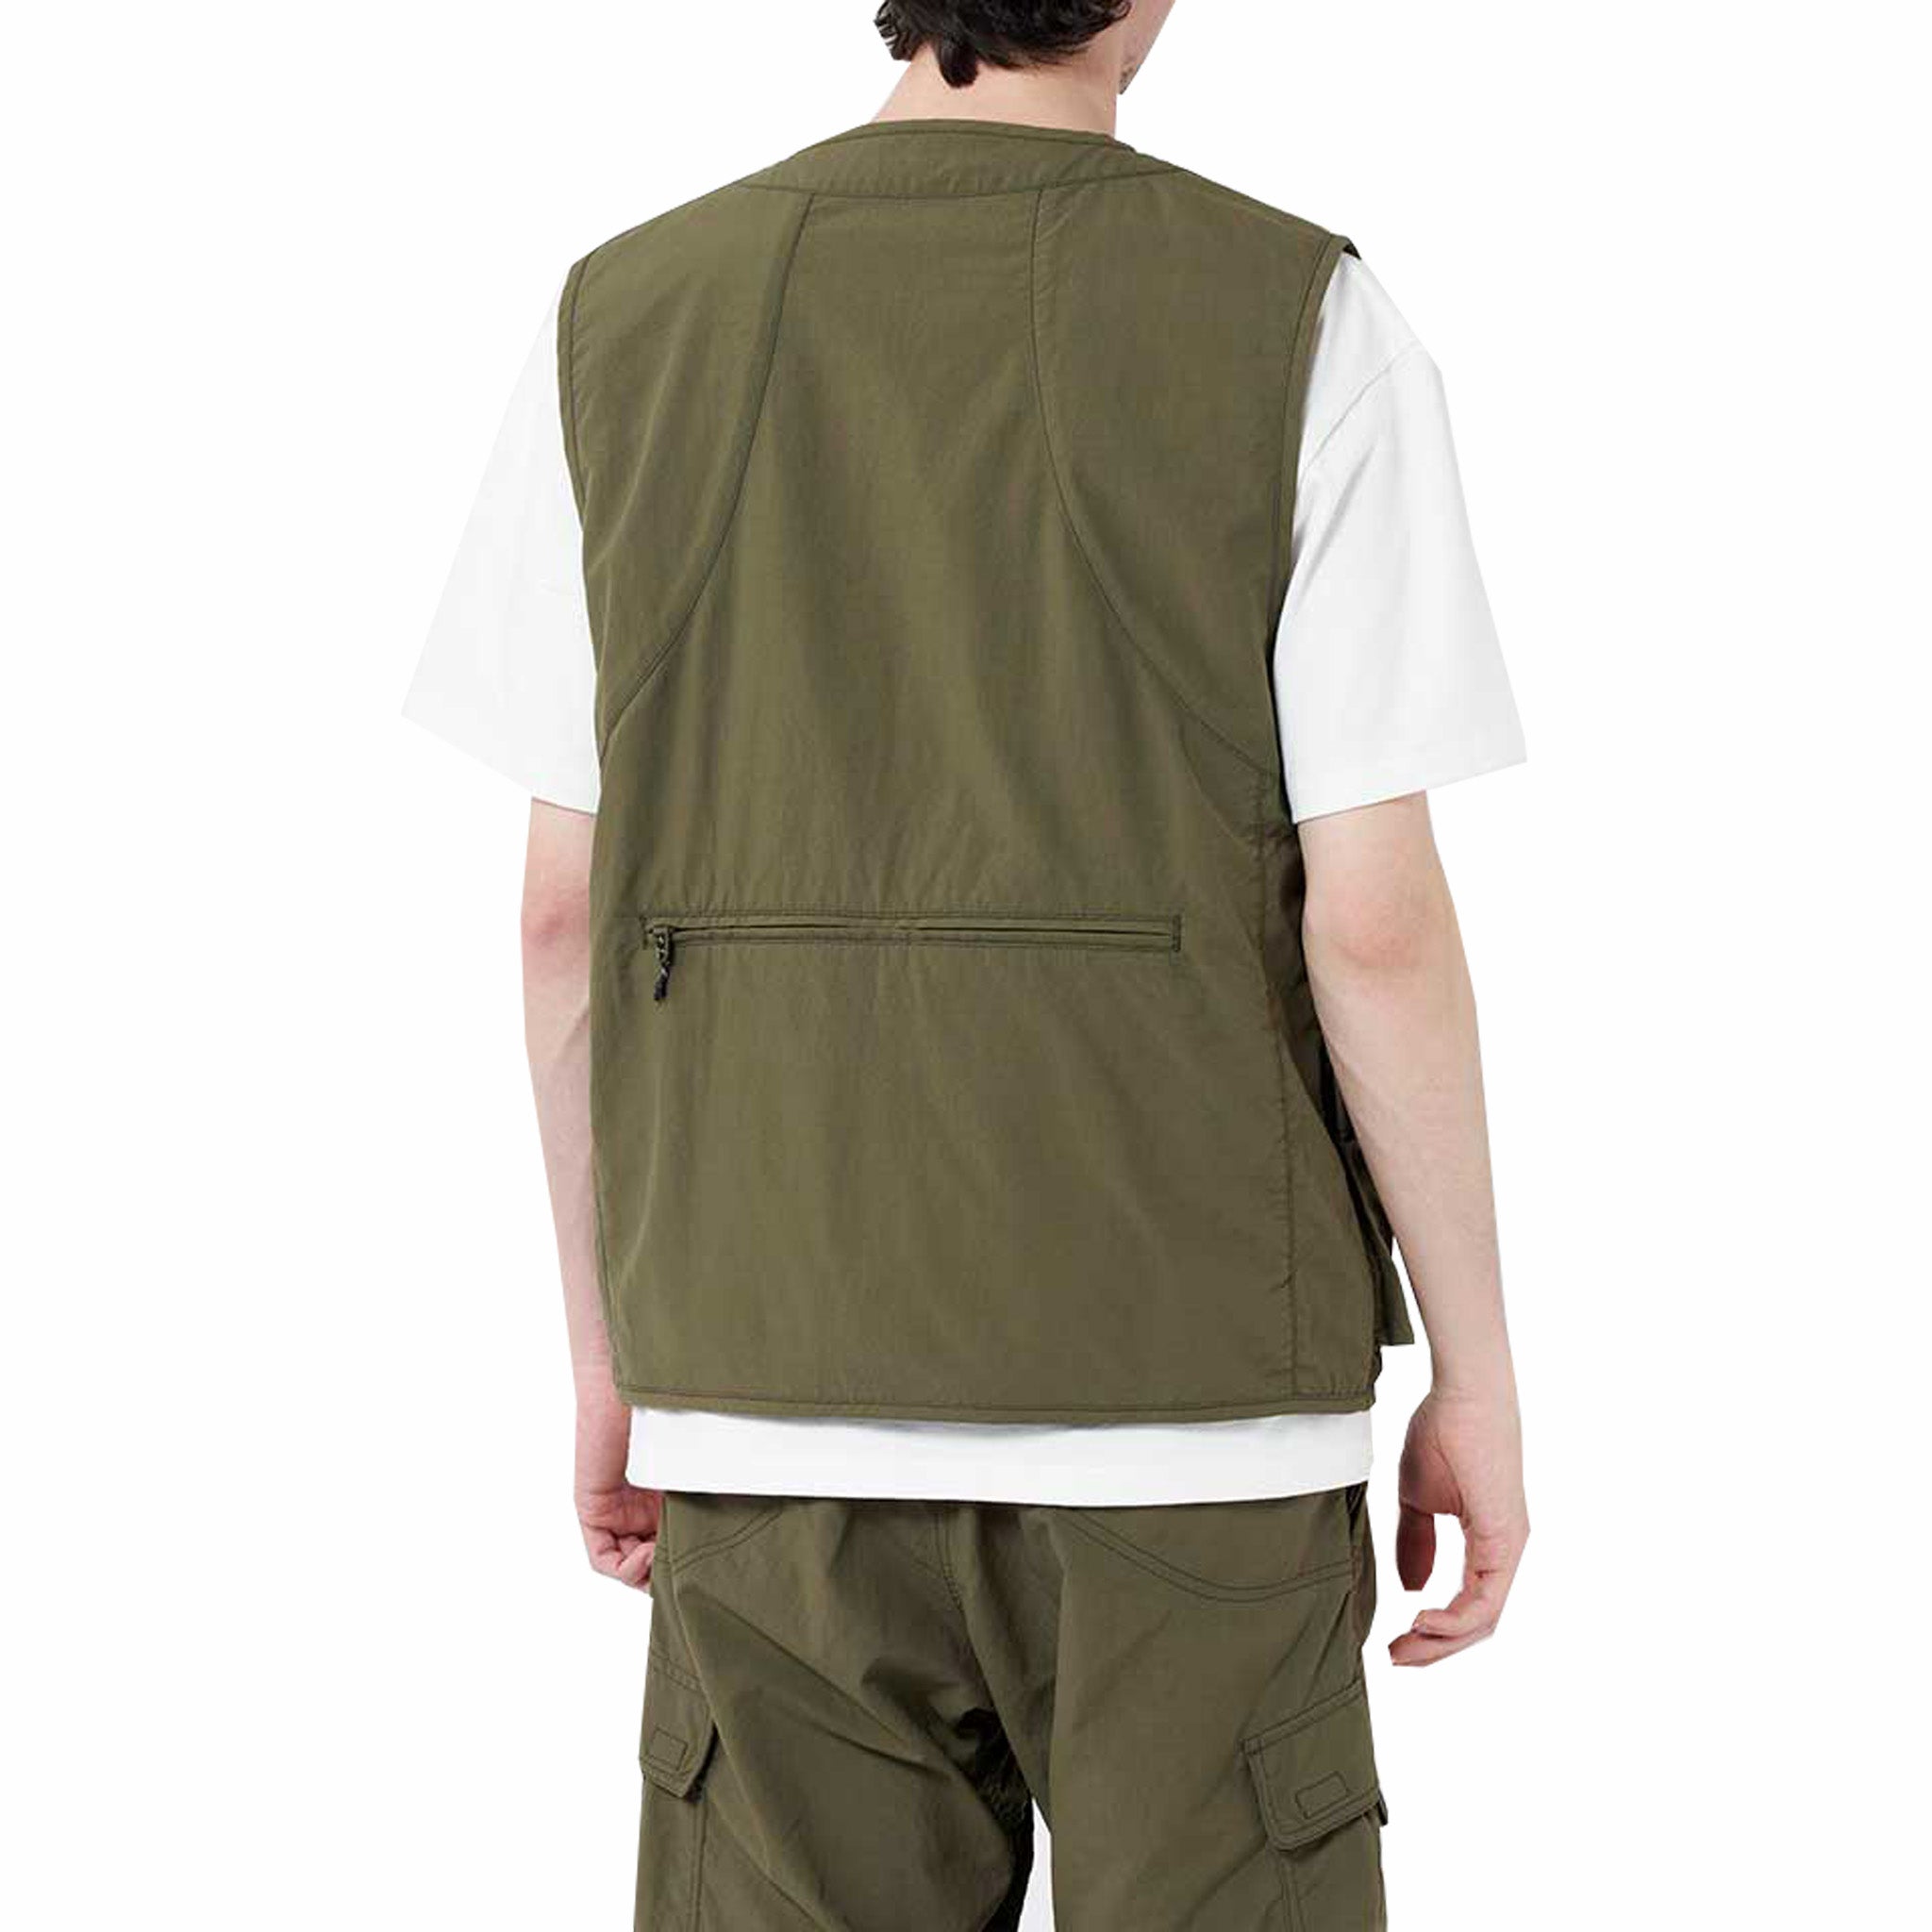 Gramicci Gone Fishing Vest (Army Green) - August Shop